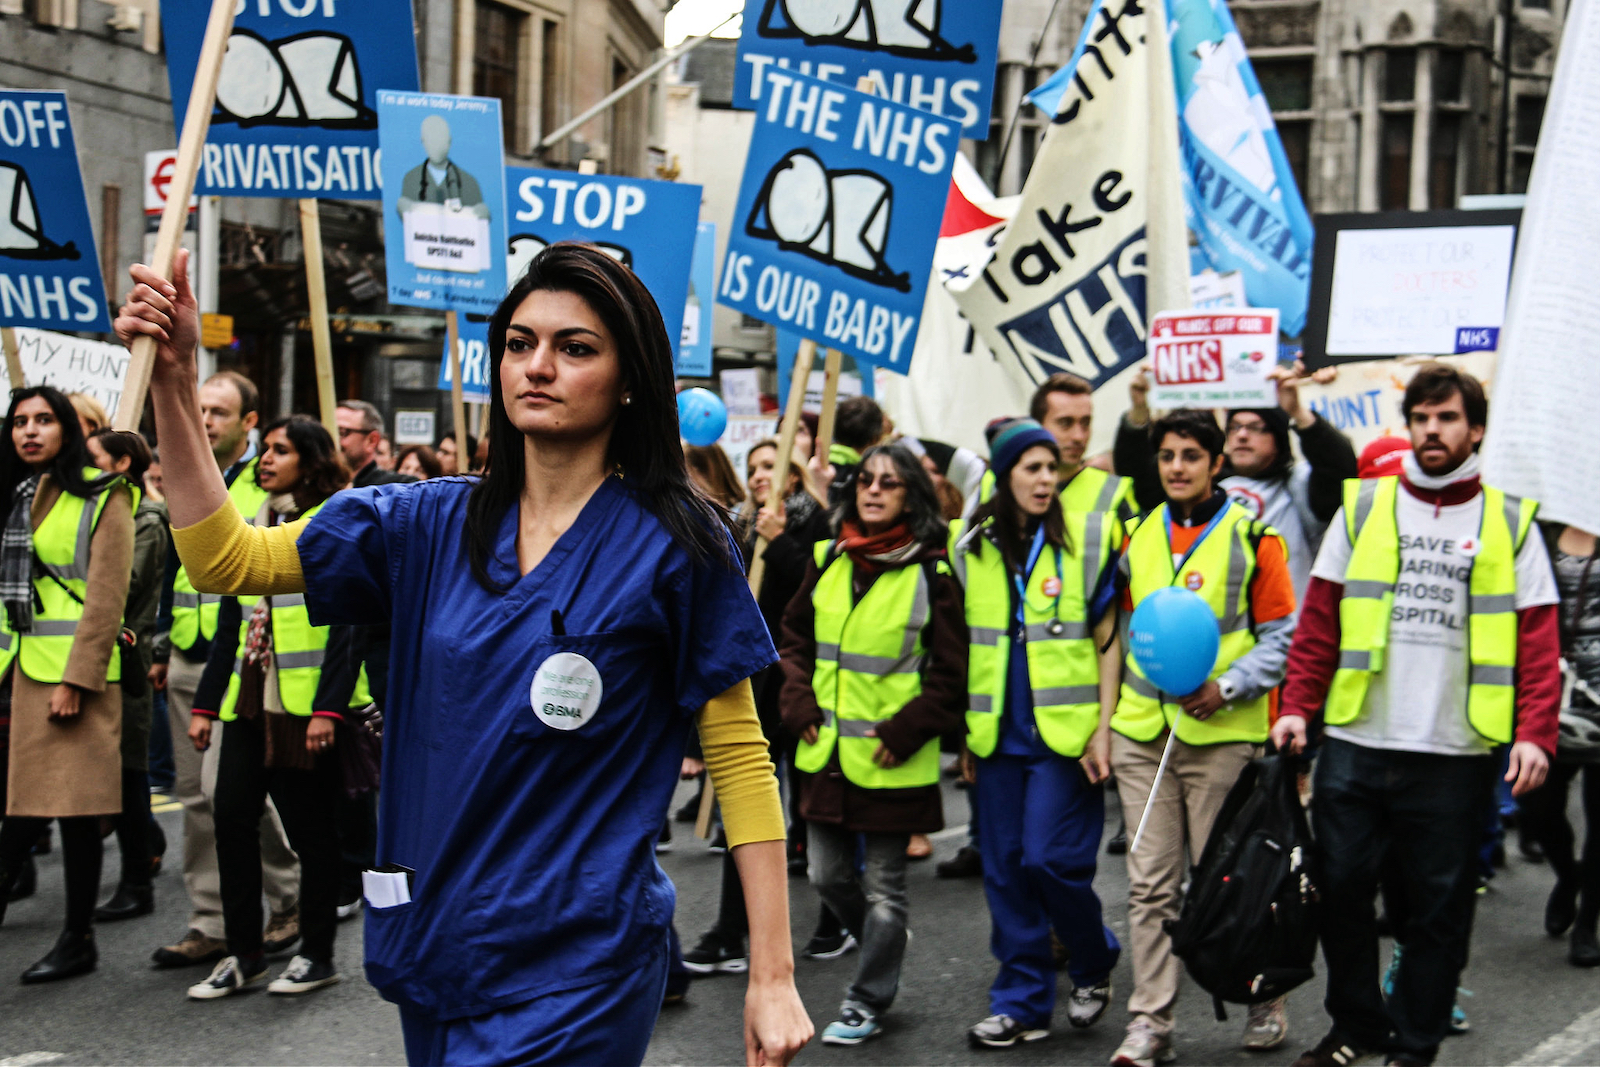 Doctors and nurses protesting changes to the NHS in London in 2015